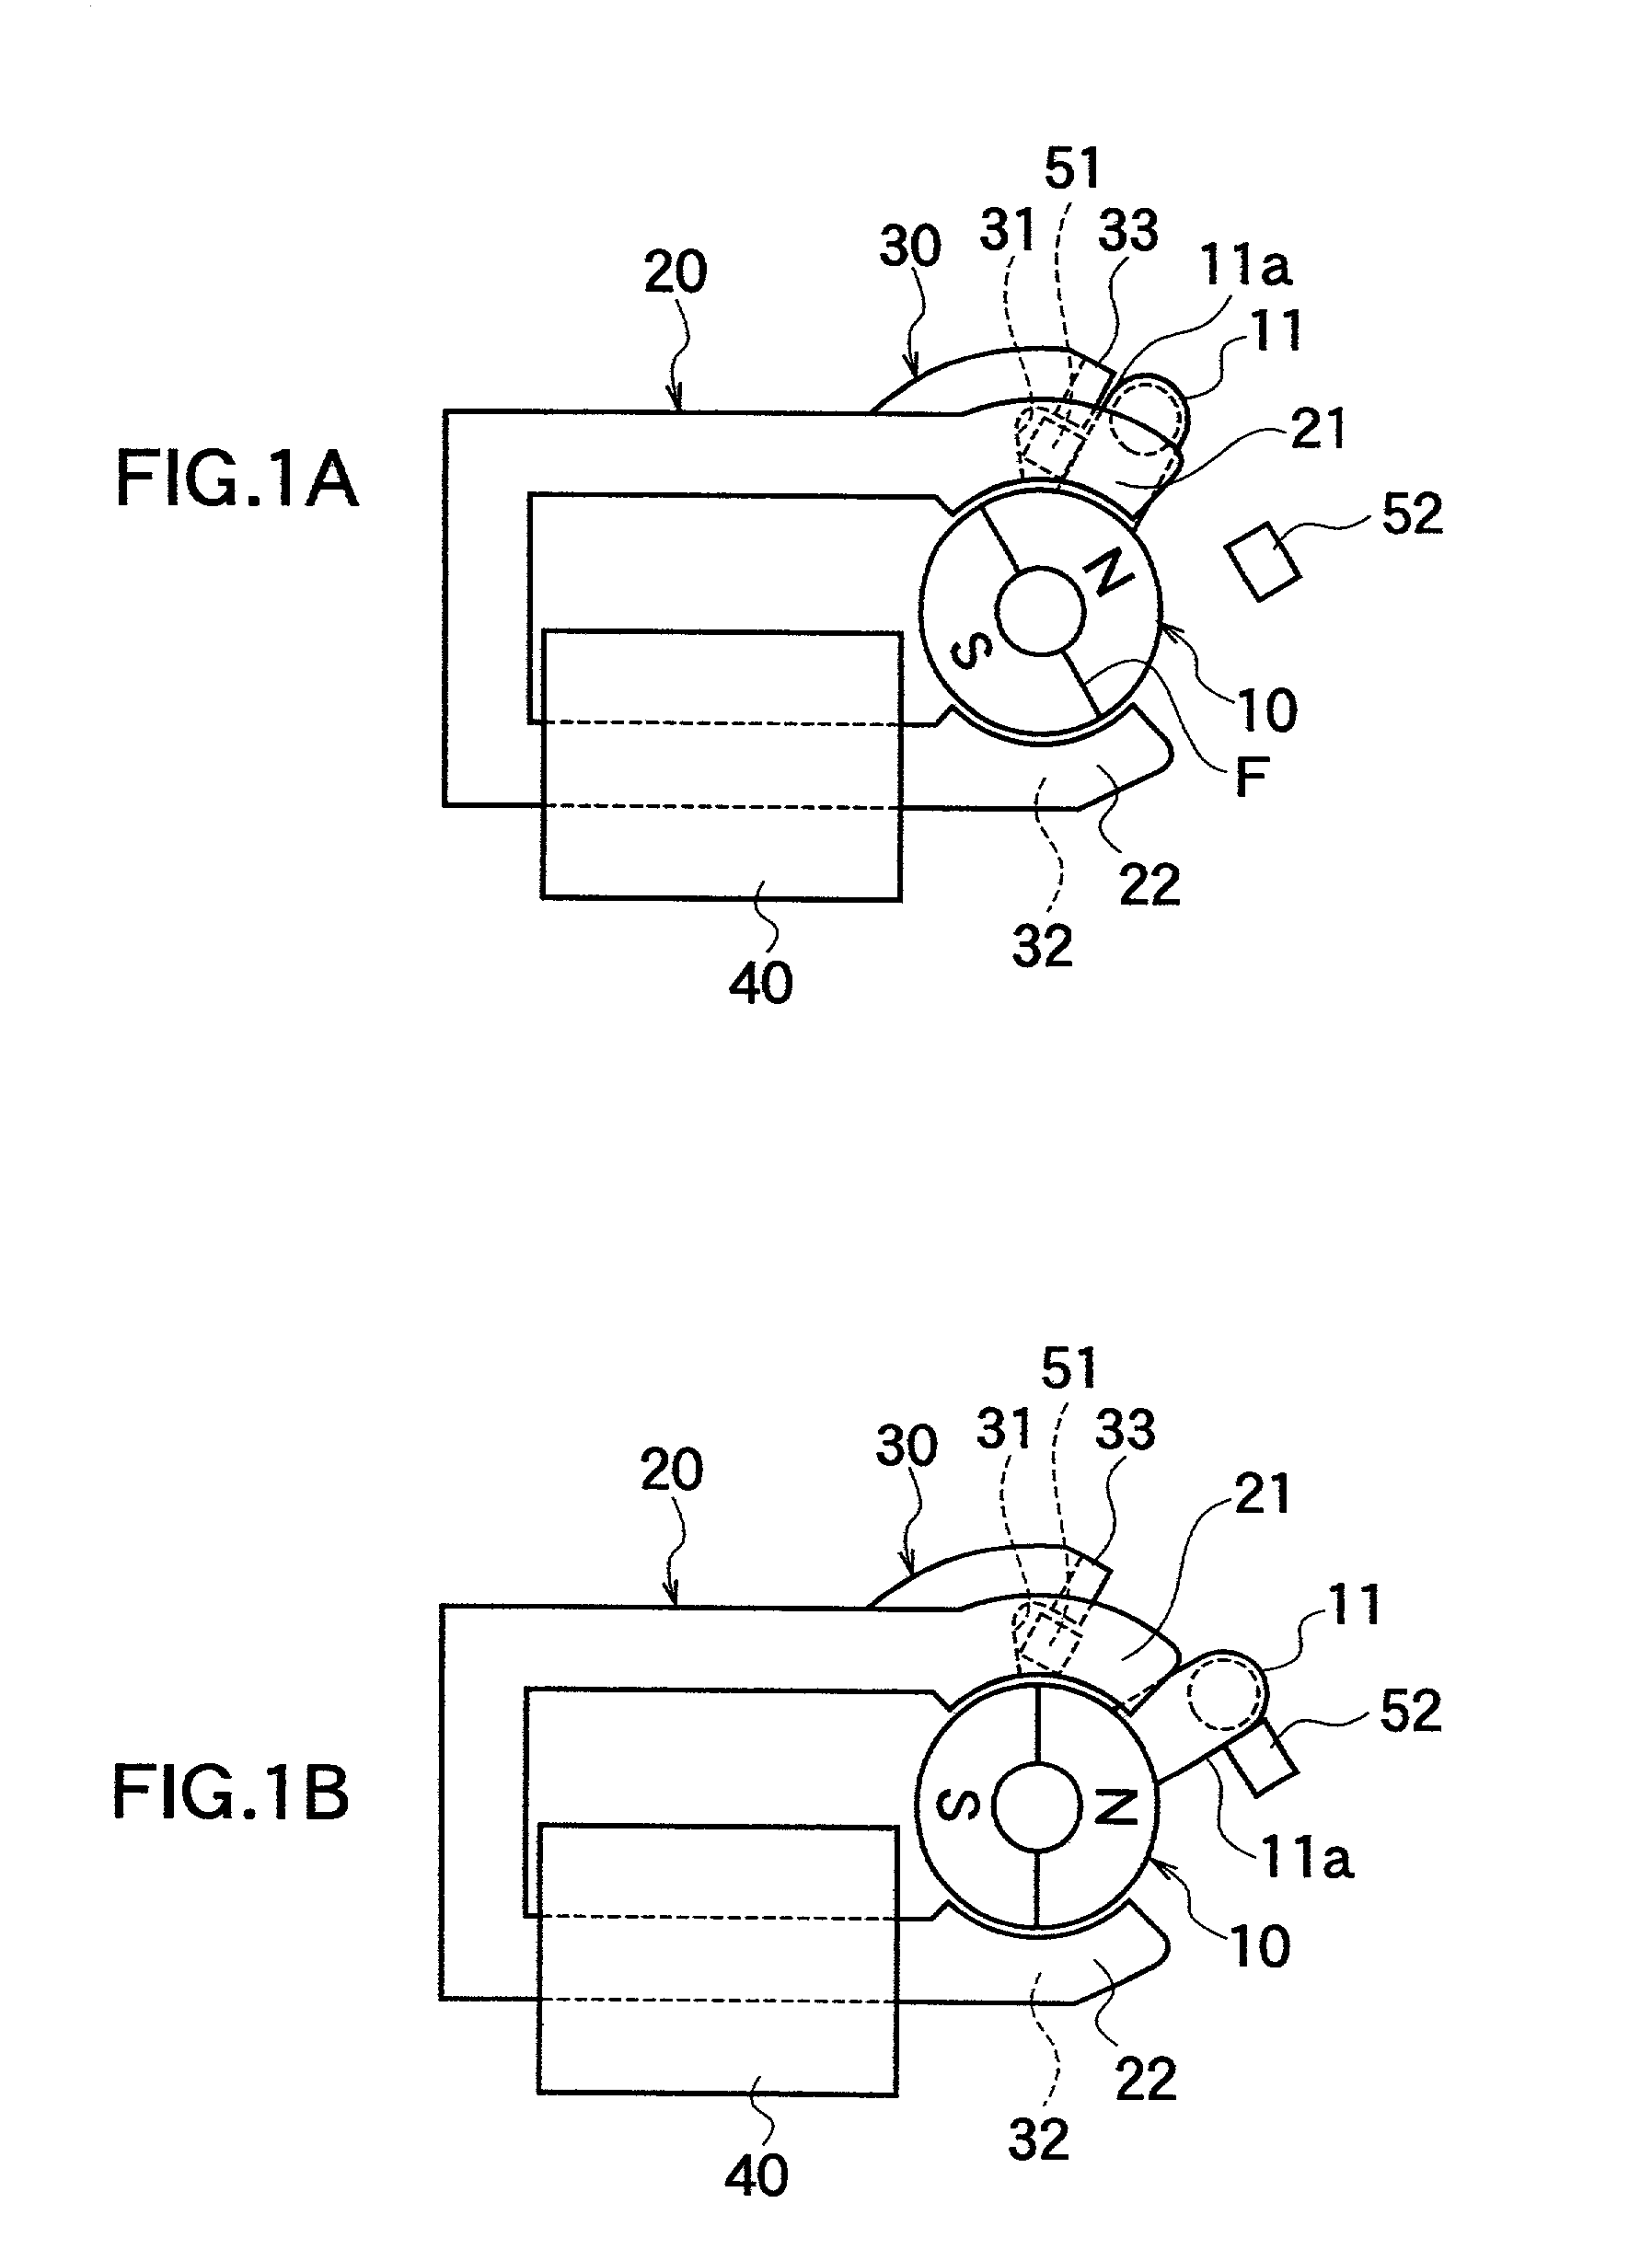 Electromagnetic actuator and shutter device for camera